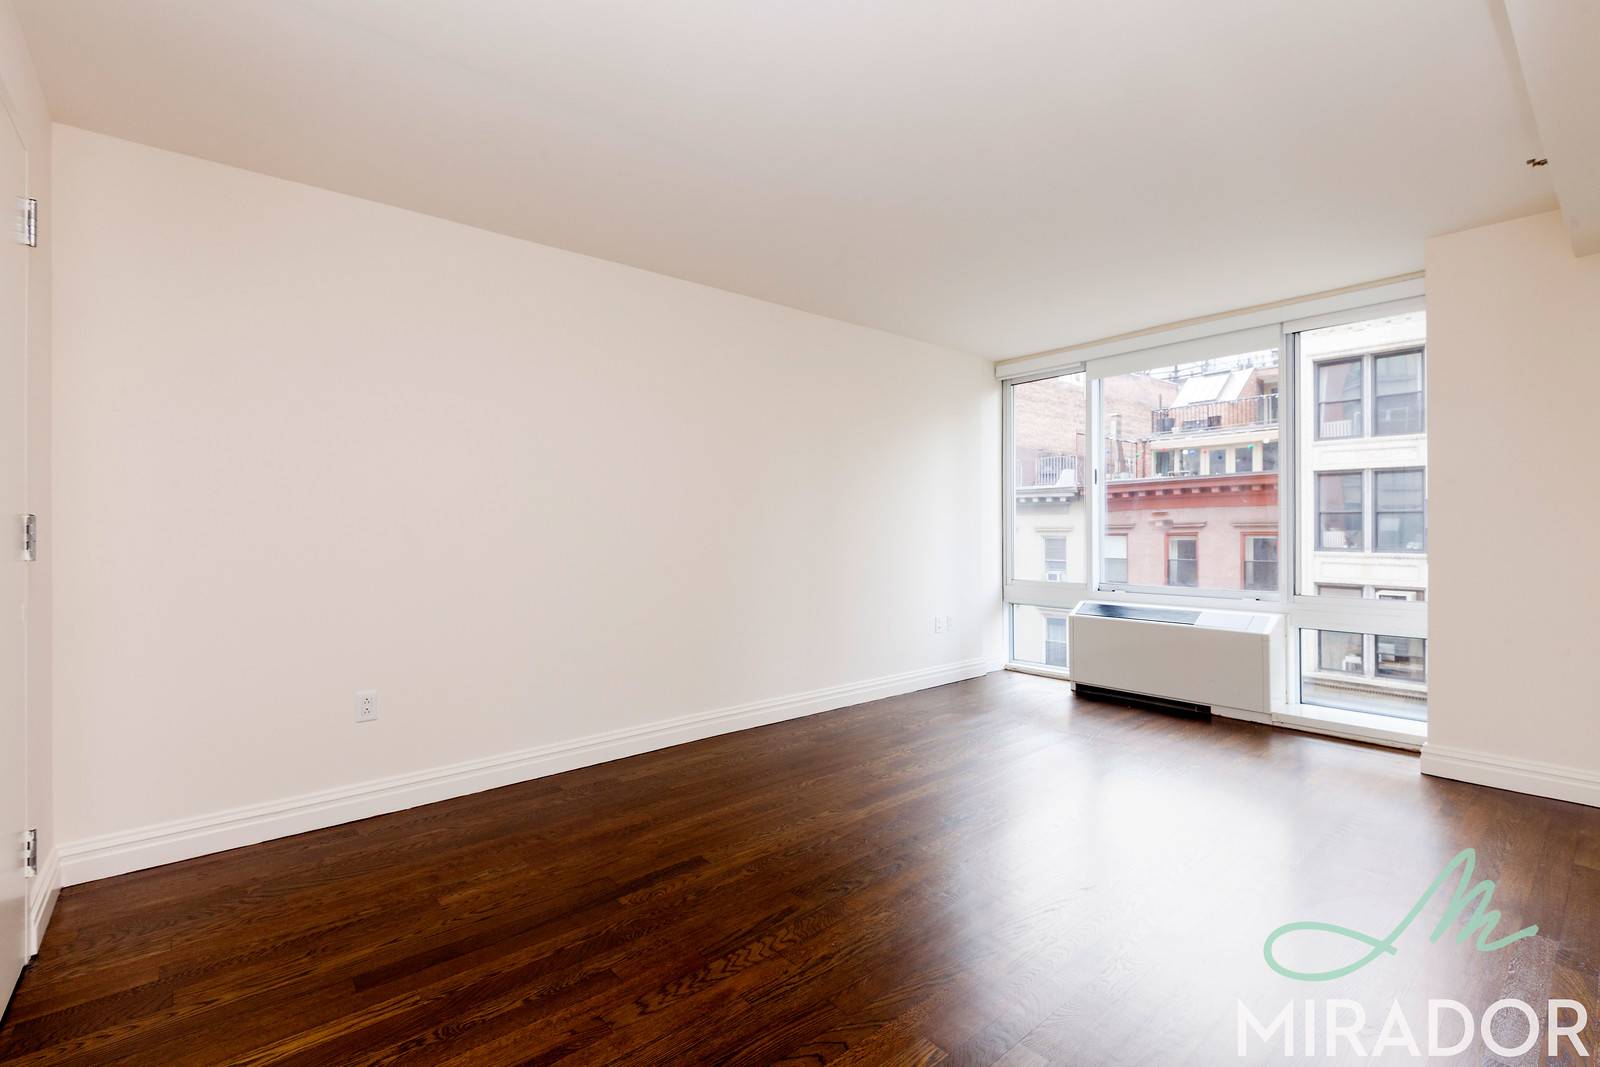 Beautiful two bedroom, two marble bathroom home at The Caroline, which is a beautifully appointed, white glove building located on 23rd and 6th, where Flatiron meets Chelsea !